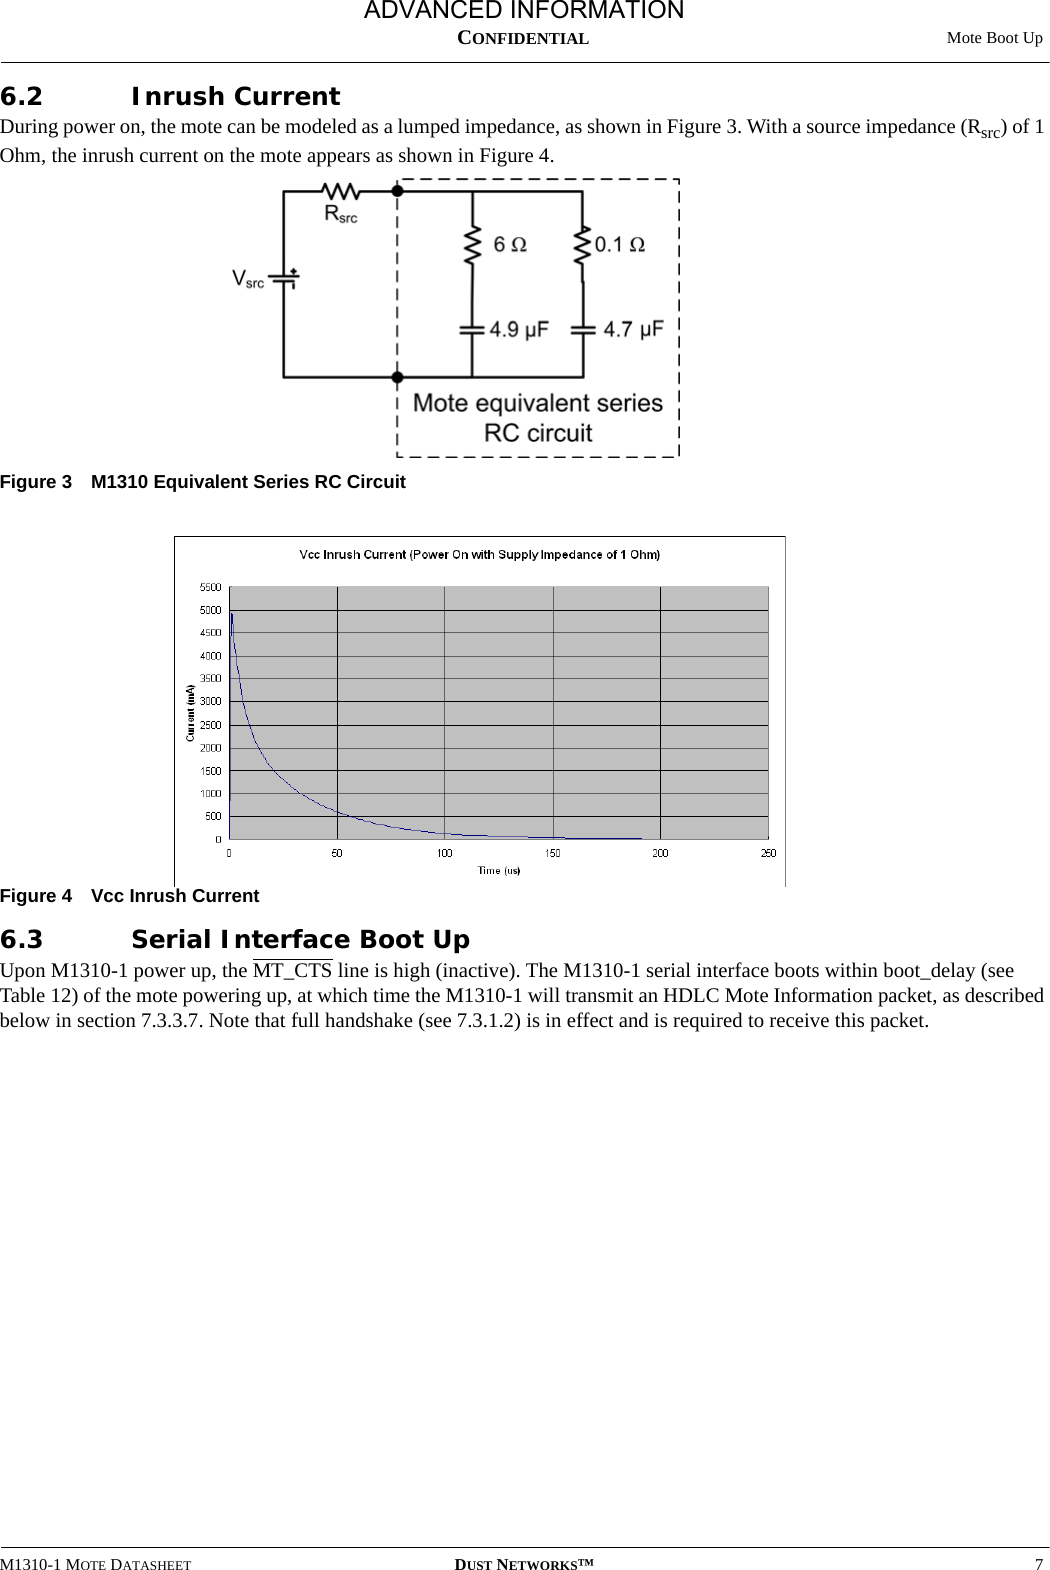  Mote Boot UpM1310-1 MOTE DATASHEET DUST NETWORKS™7CONFIDENTIAL6.2 Inrush CurrentDuring power on, the mote can be modeled as a lumped impedance, as shown in Figure 3. With a source impedance (Rsrc) of 1 Ohm, the inrush current on the mote appears as shown in Figure 4.Figure 3 M1310 Equivalent Series RC CircuitFigure 4 Vcc Inrush Current6.3 Serial Interface Boot UpUpon M1310-1 power up, the MT_CTS line is high (inactive). The M1310-1 serial interface boots within boot_delay (see Table 12) of the mote powering up, at which time the M1310-1 will transmit an HDLC Mote Information packet, as described below in section 7.3.3.7. Note that full handshake (see 7.3.1.2) is in effect and is required to receive this packet.ADVANCED INFORMATION